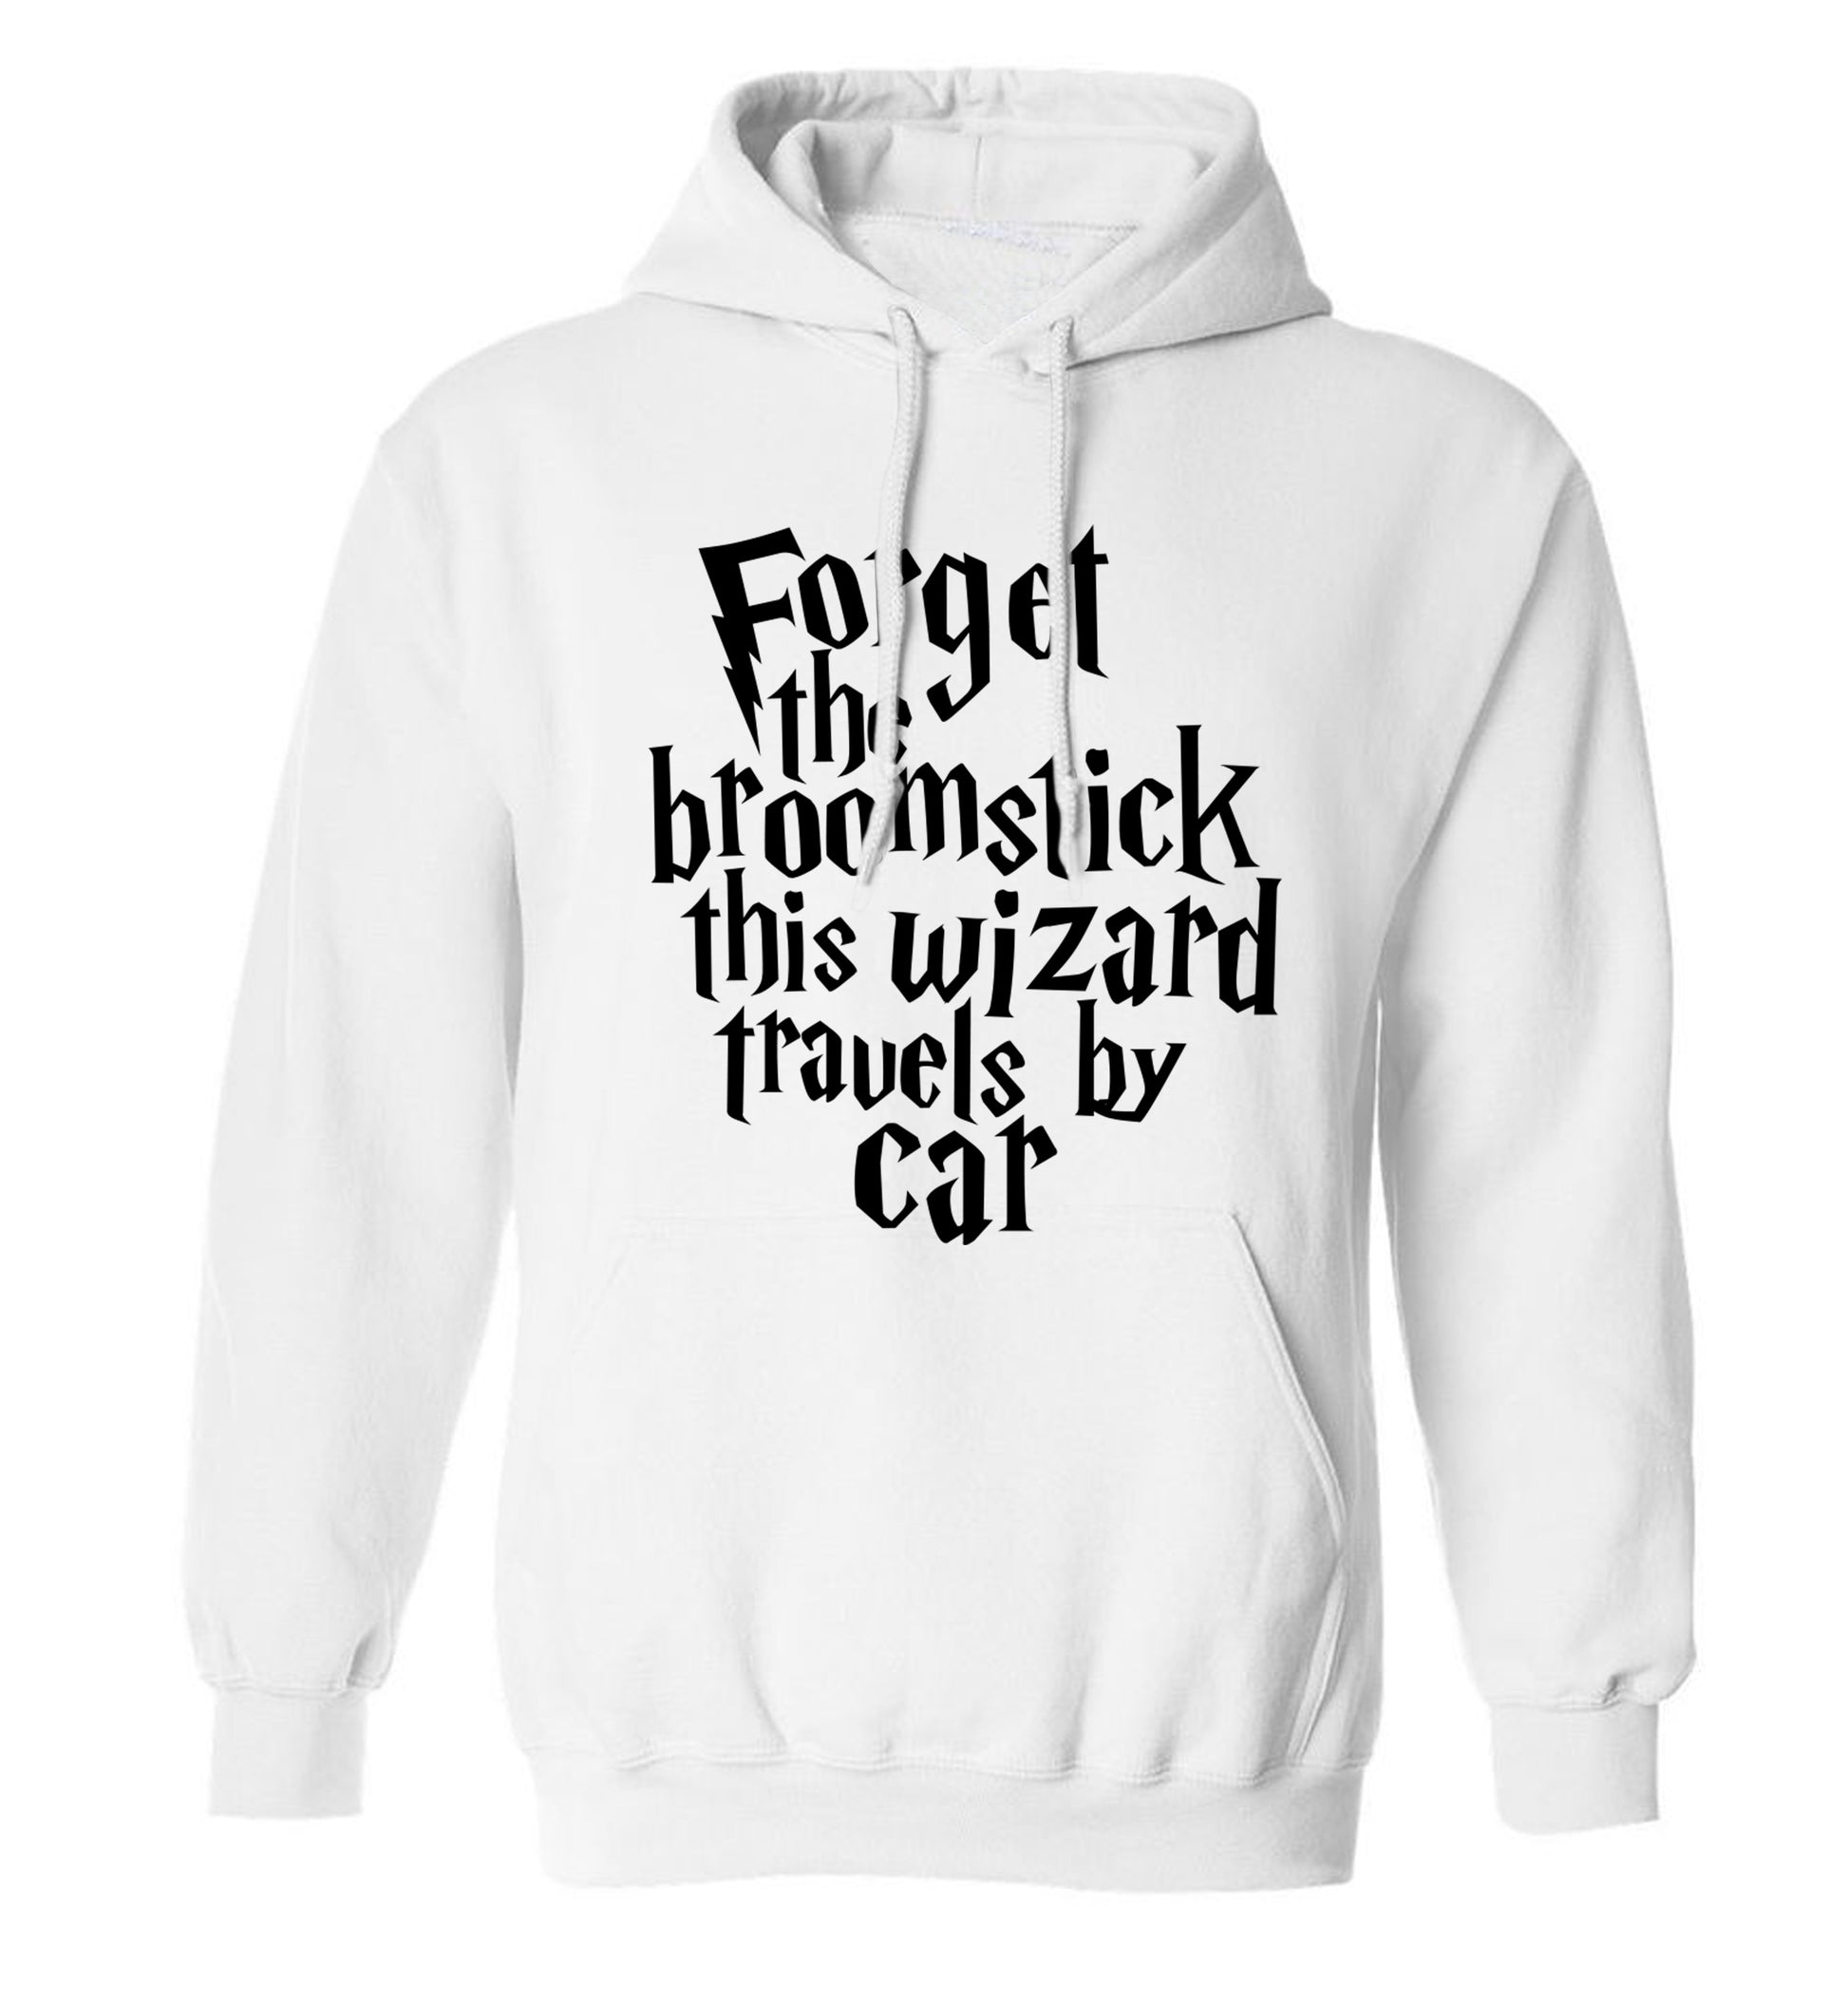 Forget the broomstick this wizard travels by car adults unisexwhite hoodie 2XL